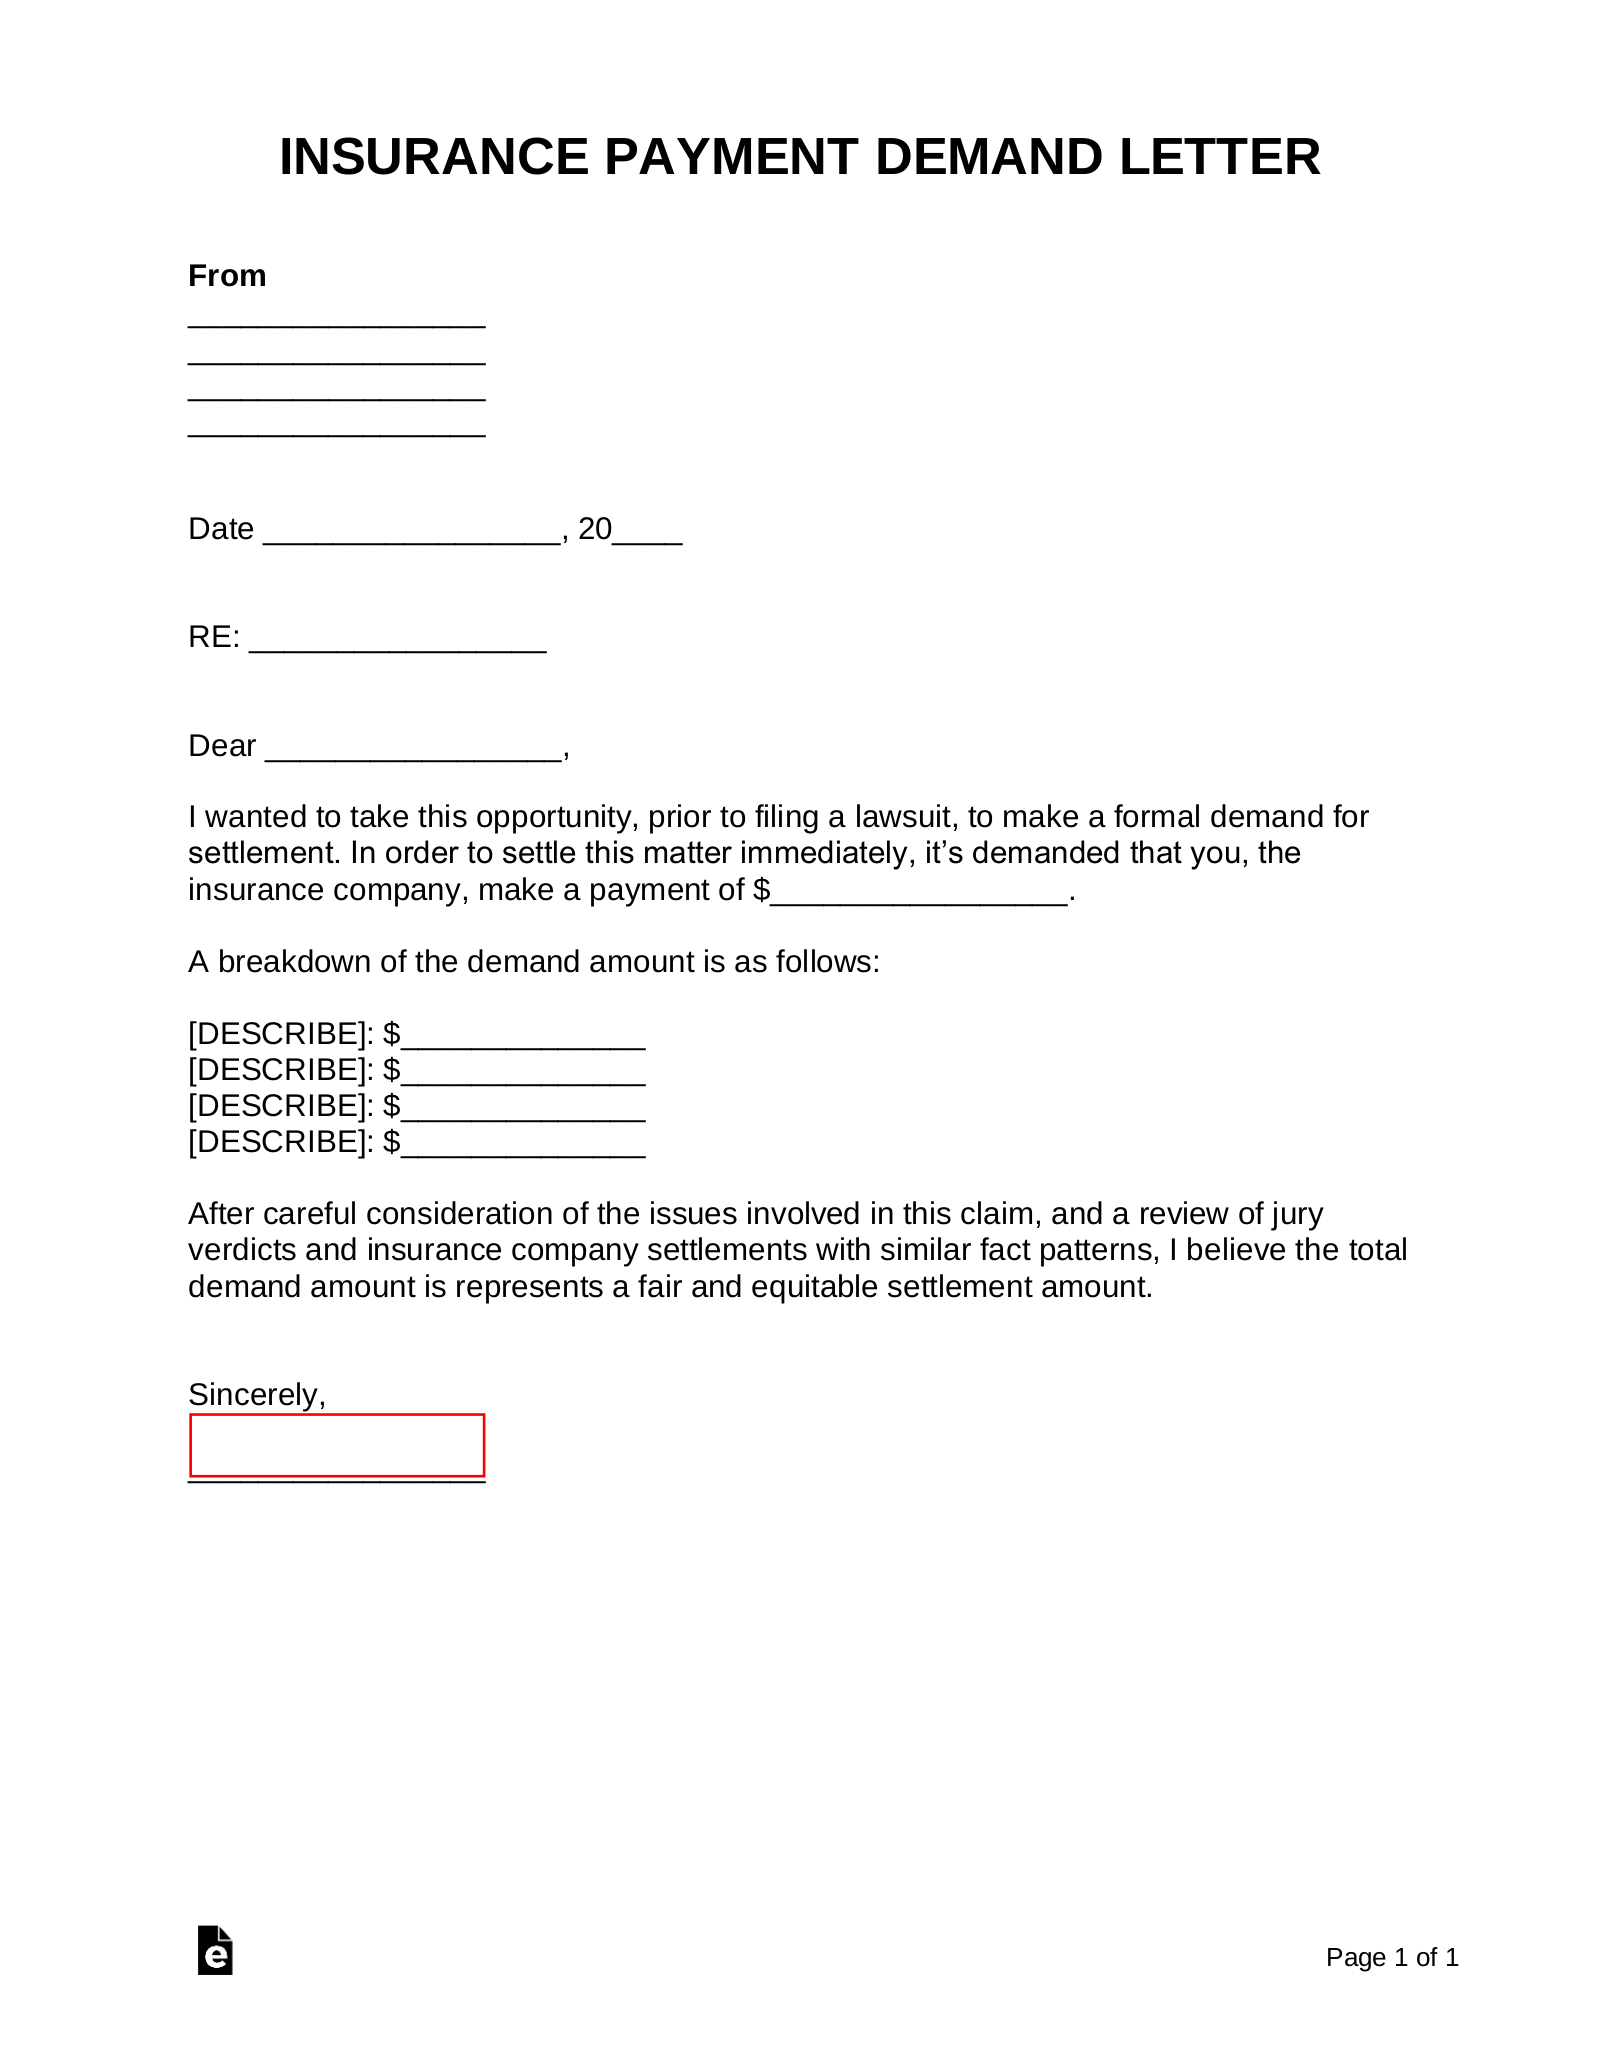 Car Accident Payment Agreement Letter Sample from eforms.com